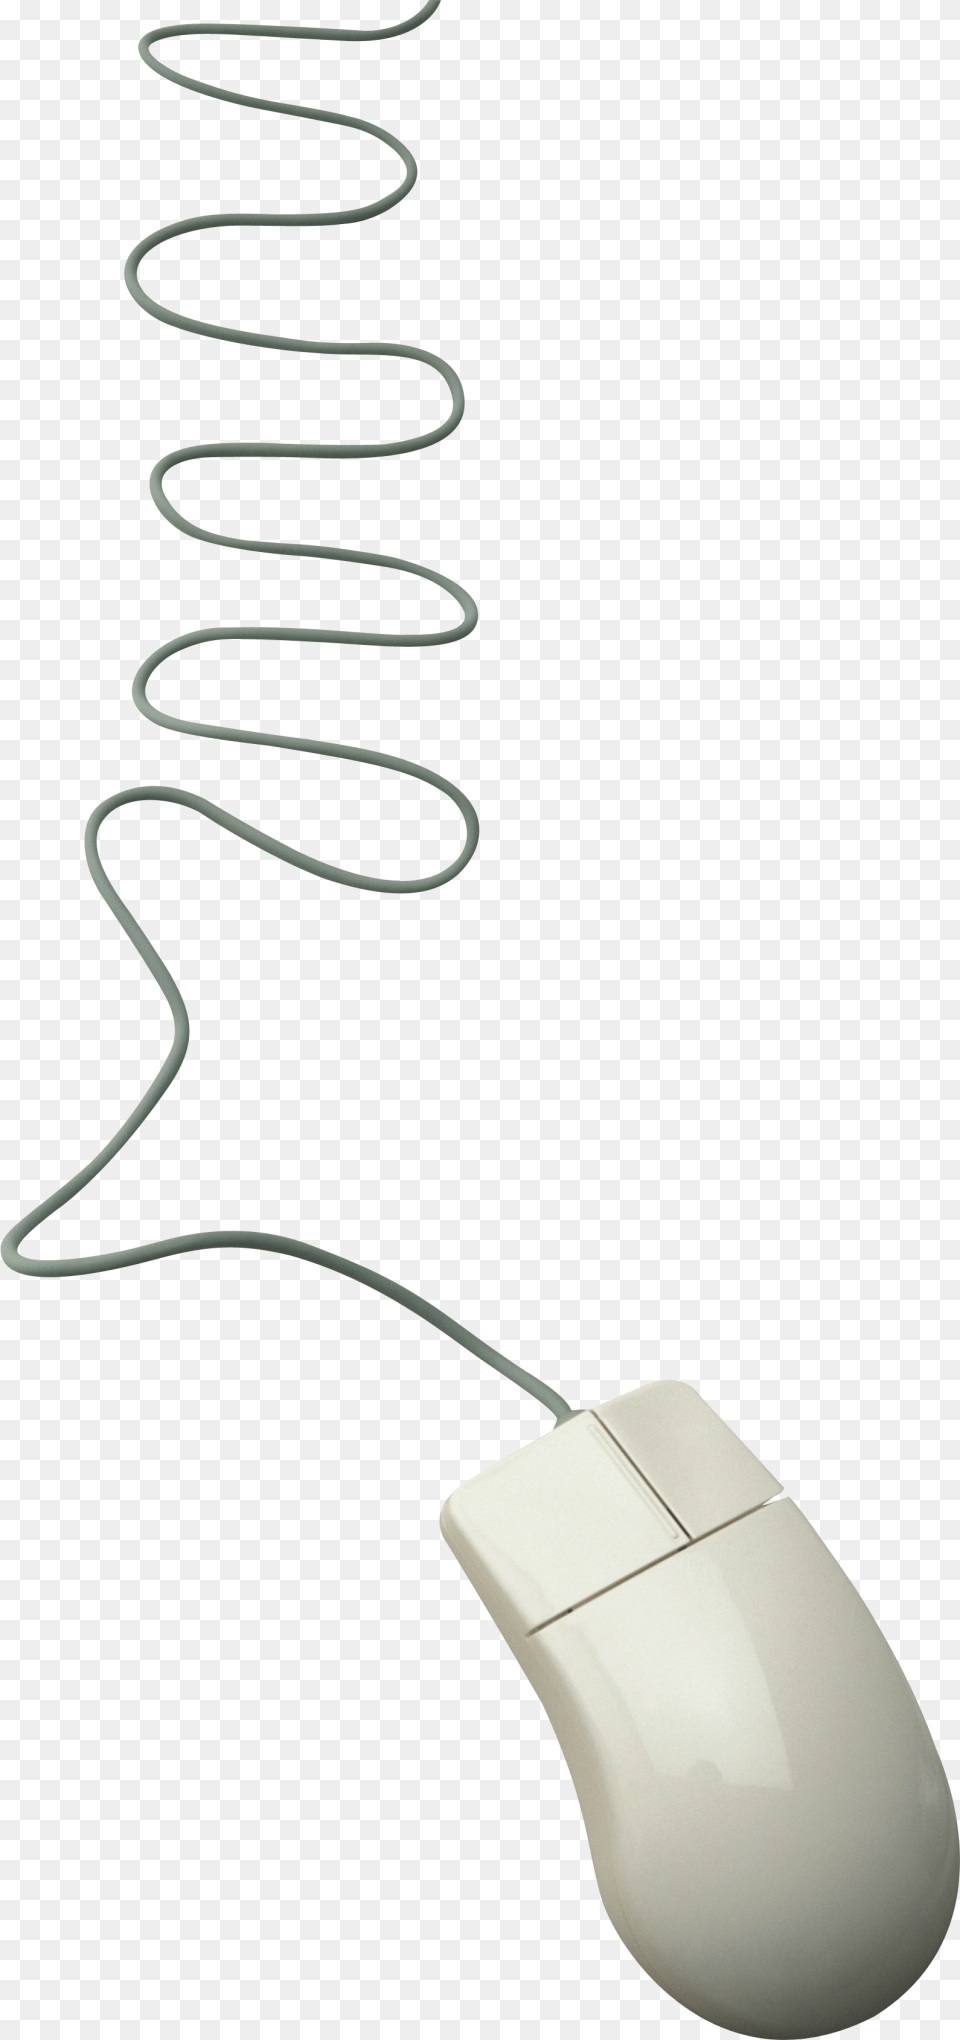 Pc Mouse Image Pc Mouse Line, Computer Hardware, Electronics, Hardware Png